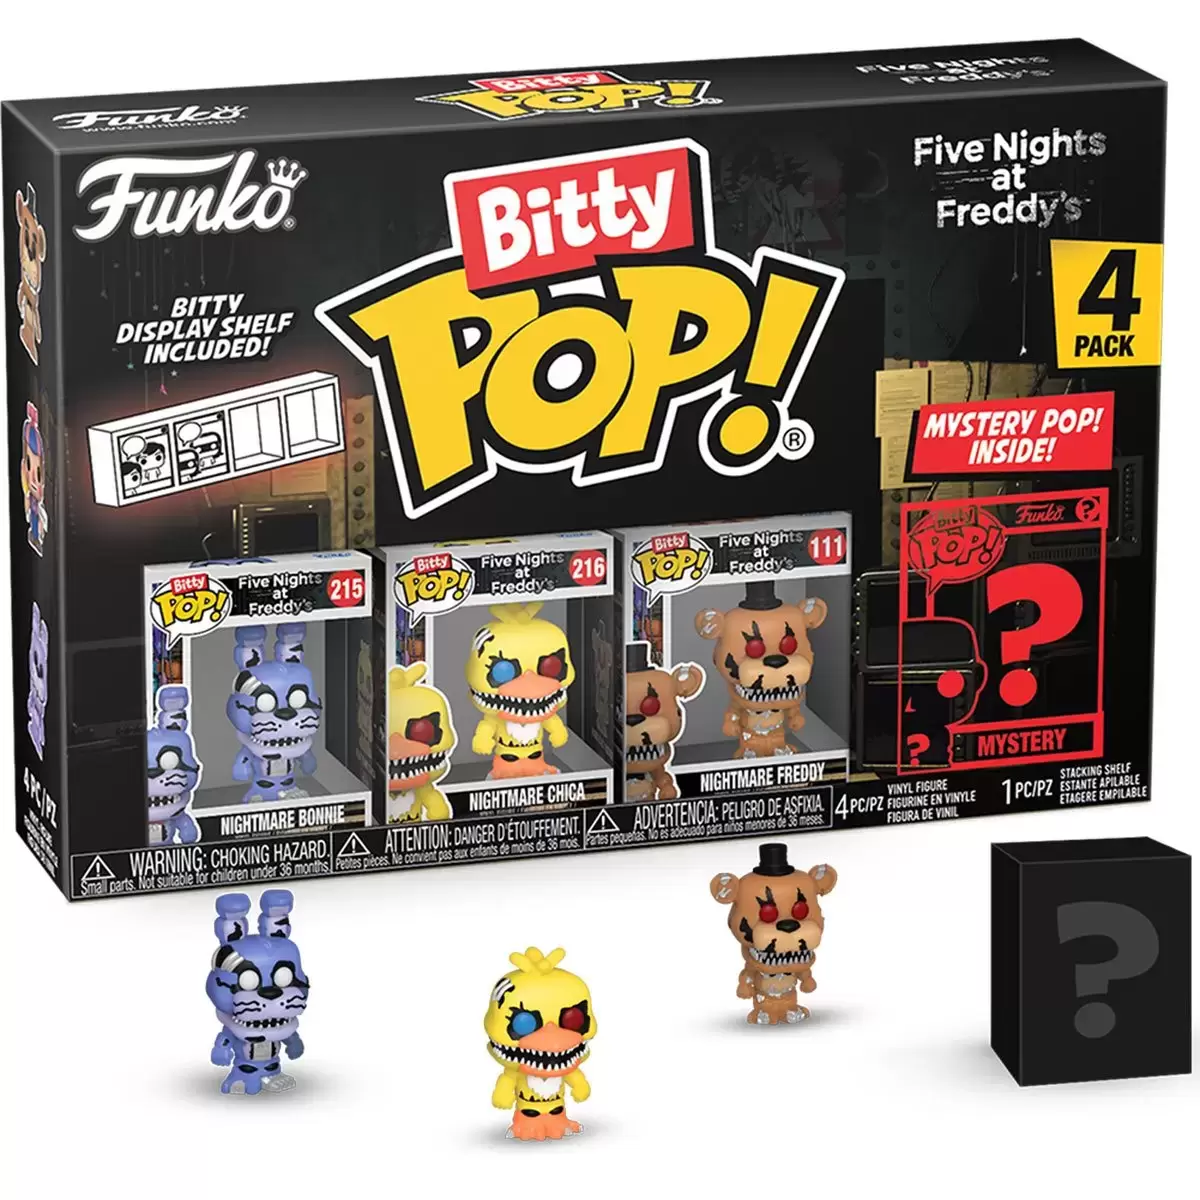 Funko Pop! Snap: Five Nights at Freddy's Wave 2 - Nightmare Chica